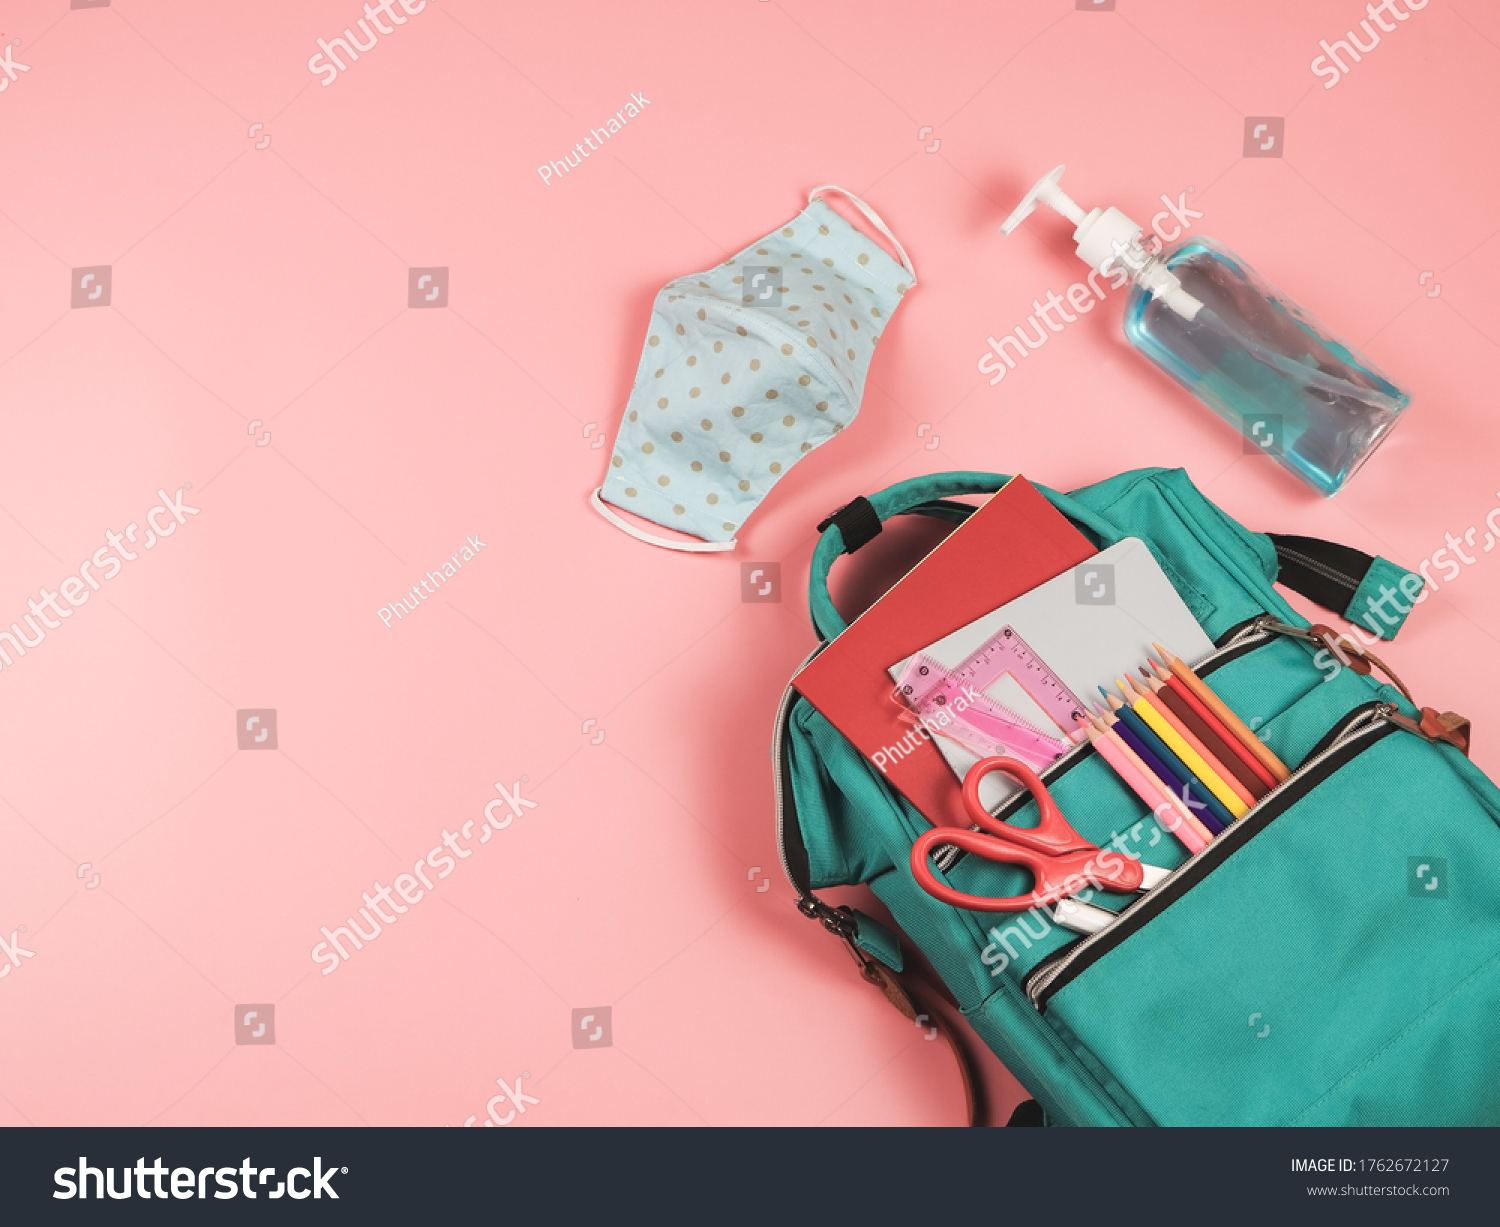 COVID-19 prevention while going back  to school  and new normal  concept.Top view of backpack with school supplies , blue polka dot fabric masks and sanitizer gel on pink background. #1762672127